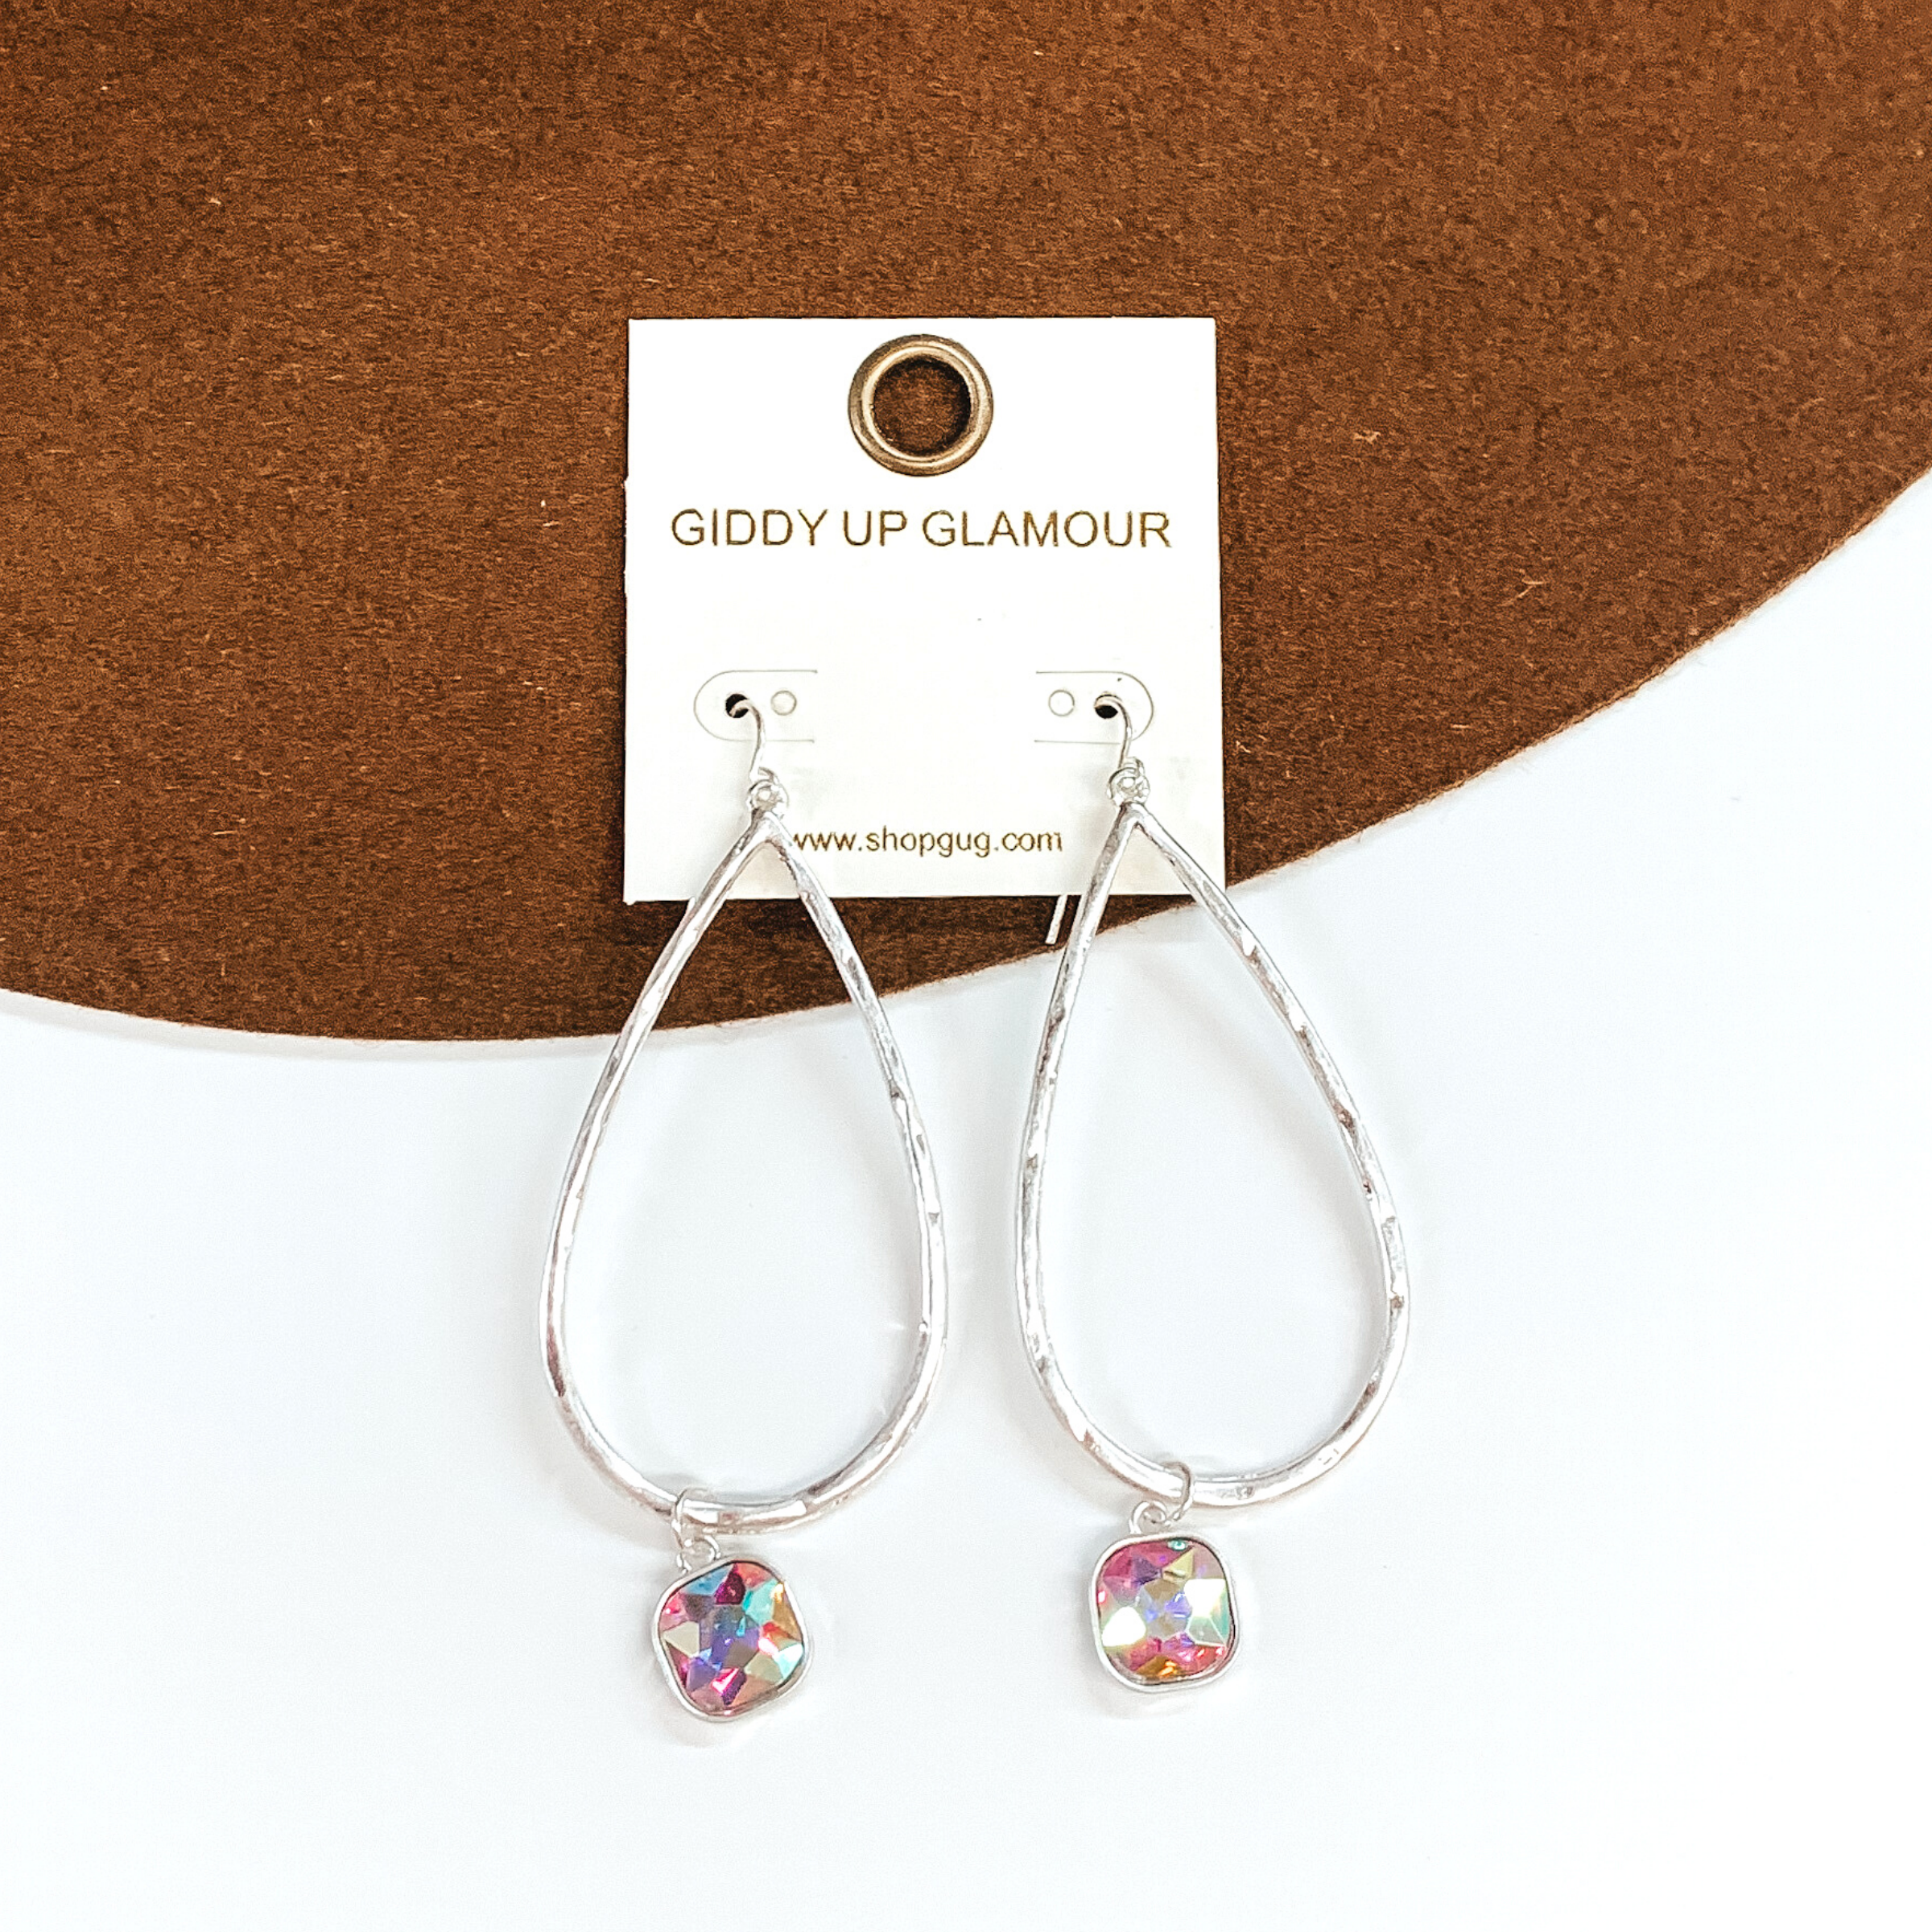 Silver teardrop hammered earrings with a hanging cushion cut ab crystal. These earrings are pictured on a white and brown background. 